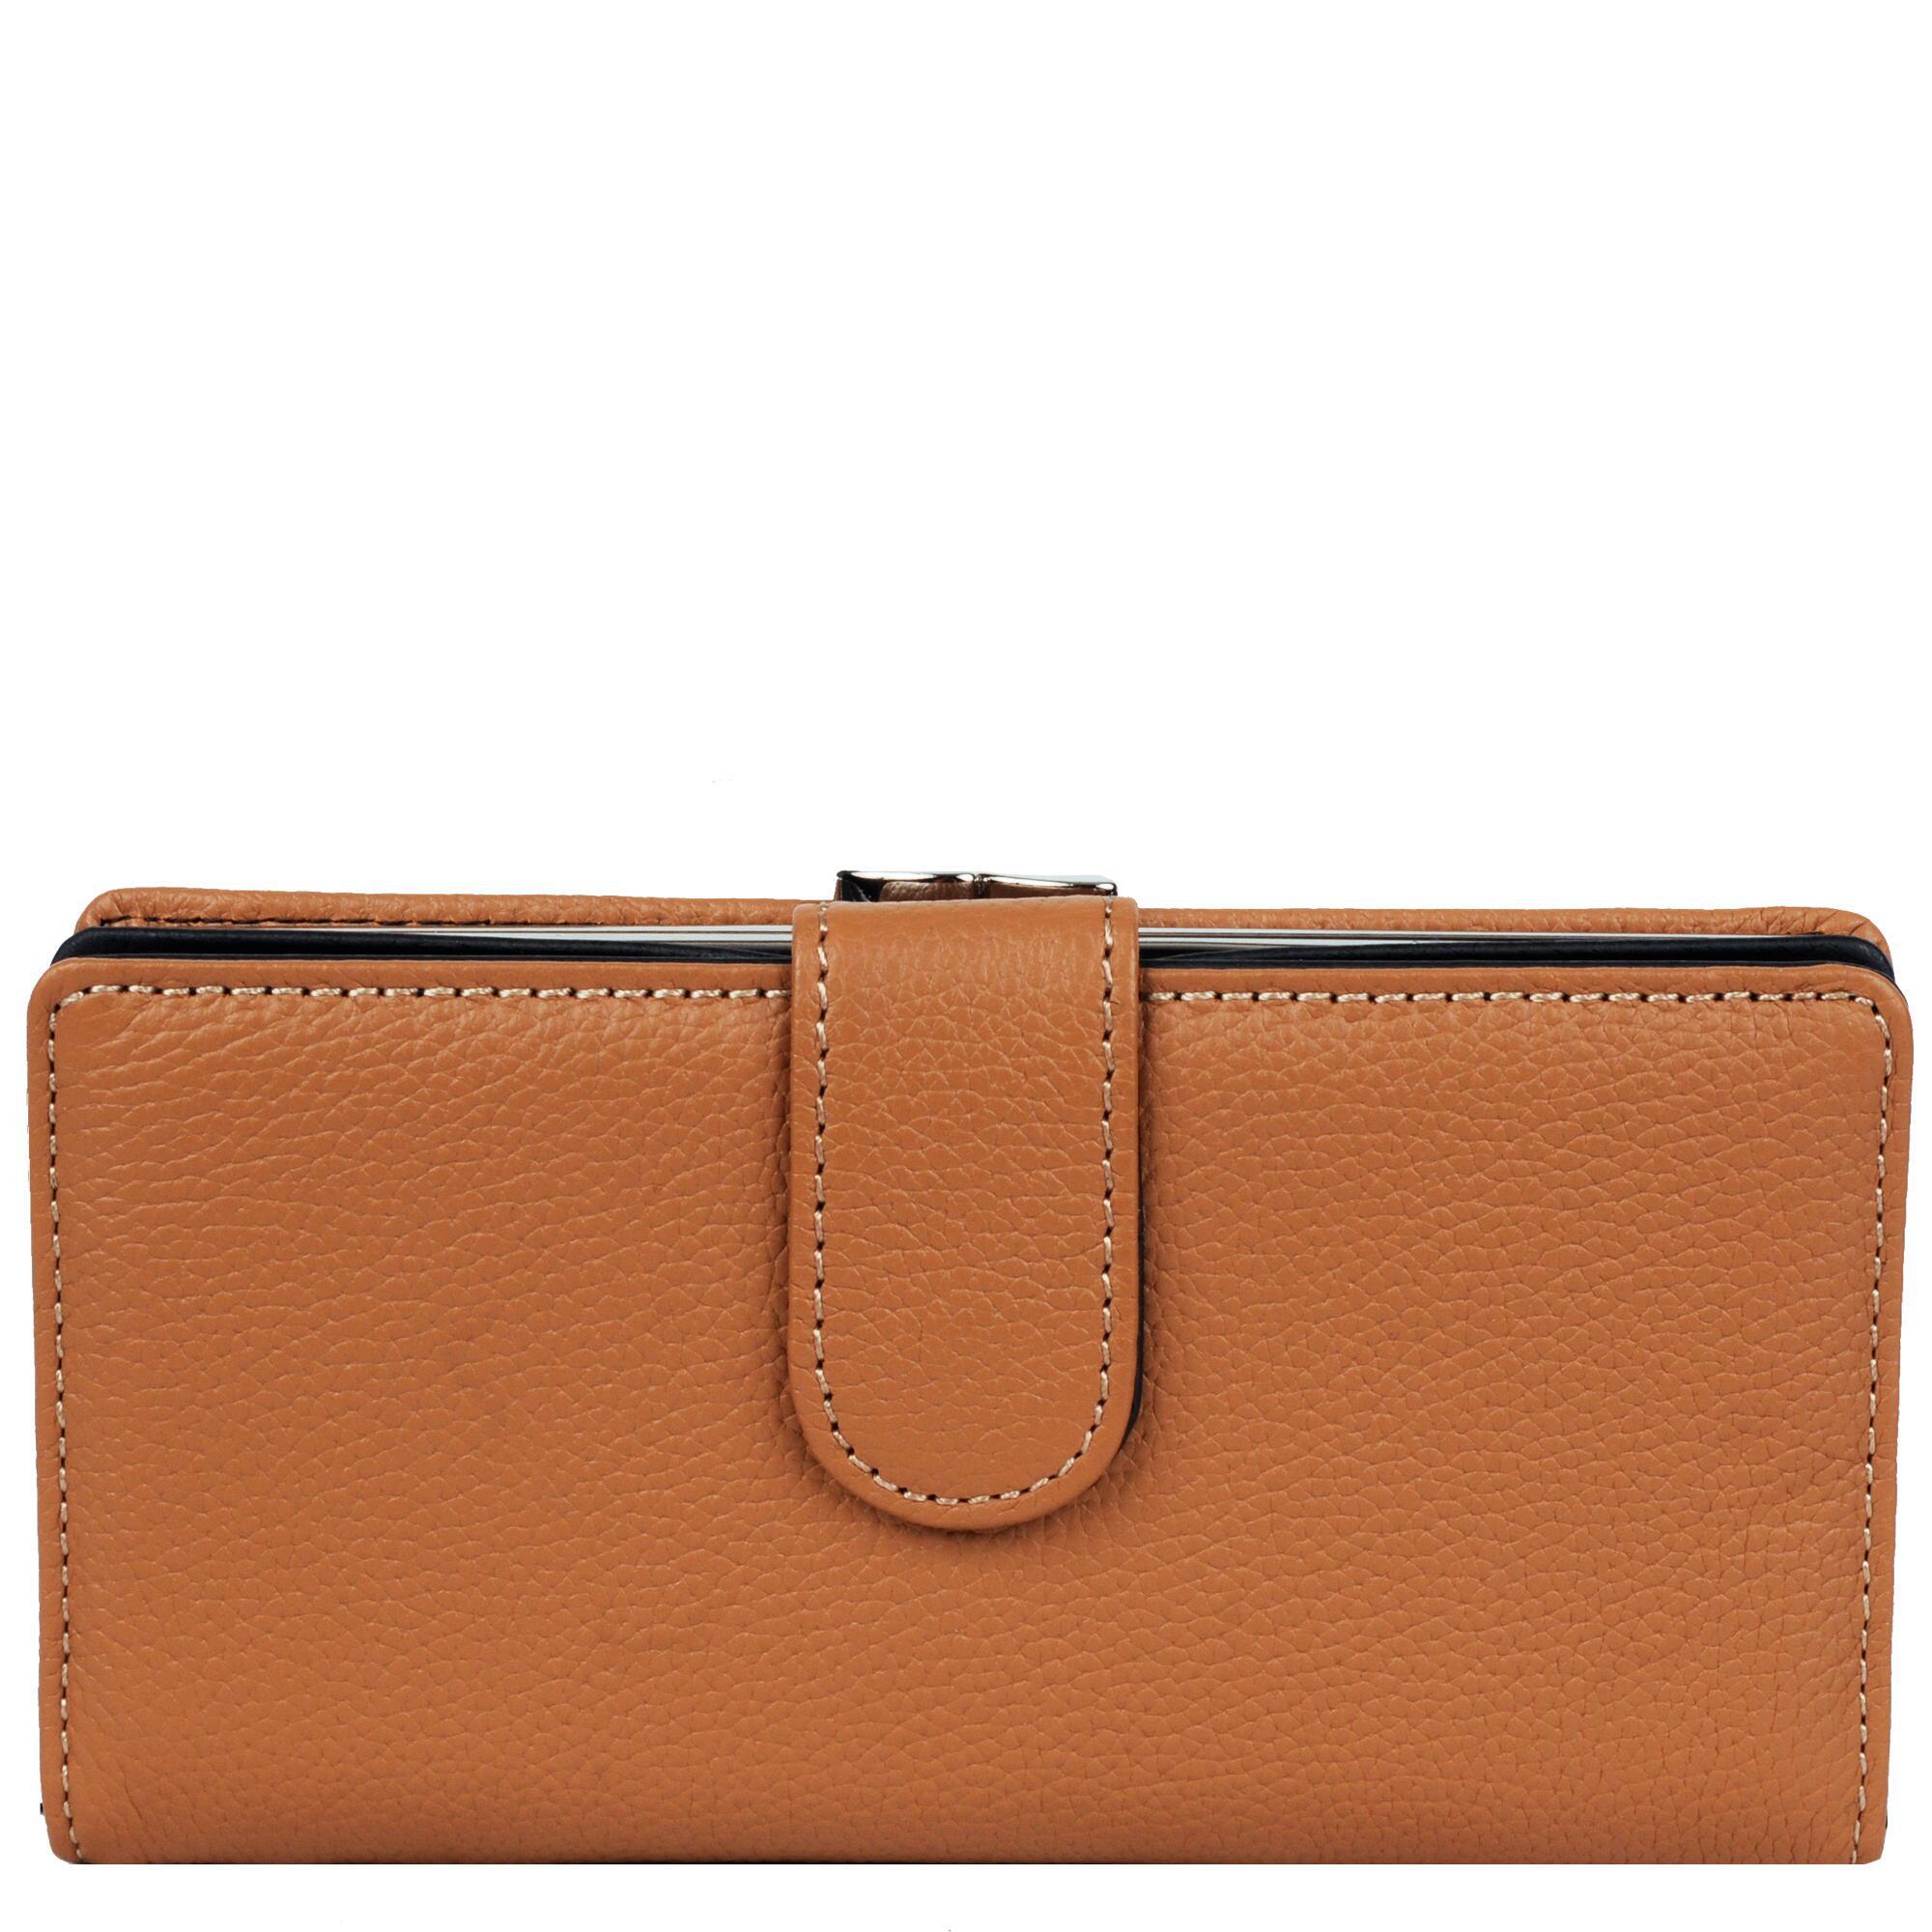 Wilsons Leather Rio Suburban Leather Clutch Wallet in Brown - Lyst